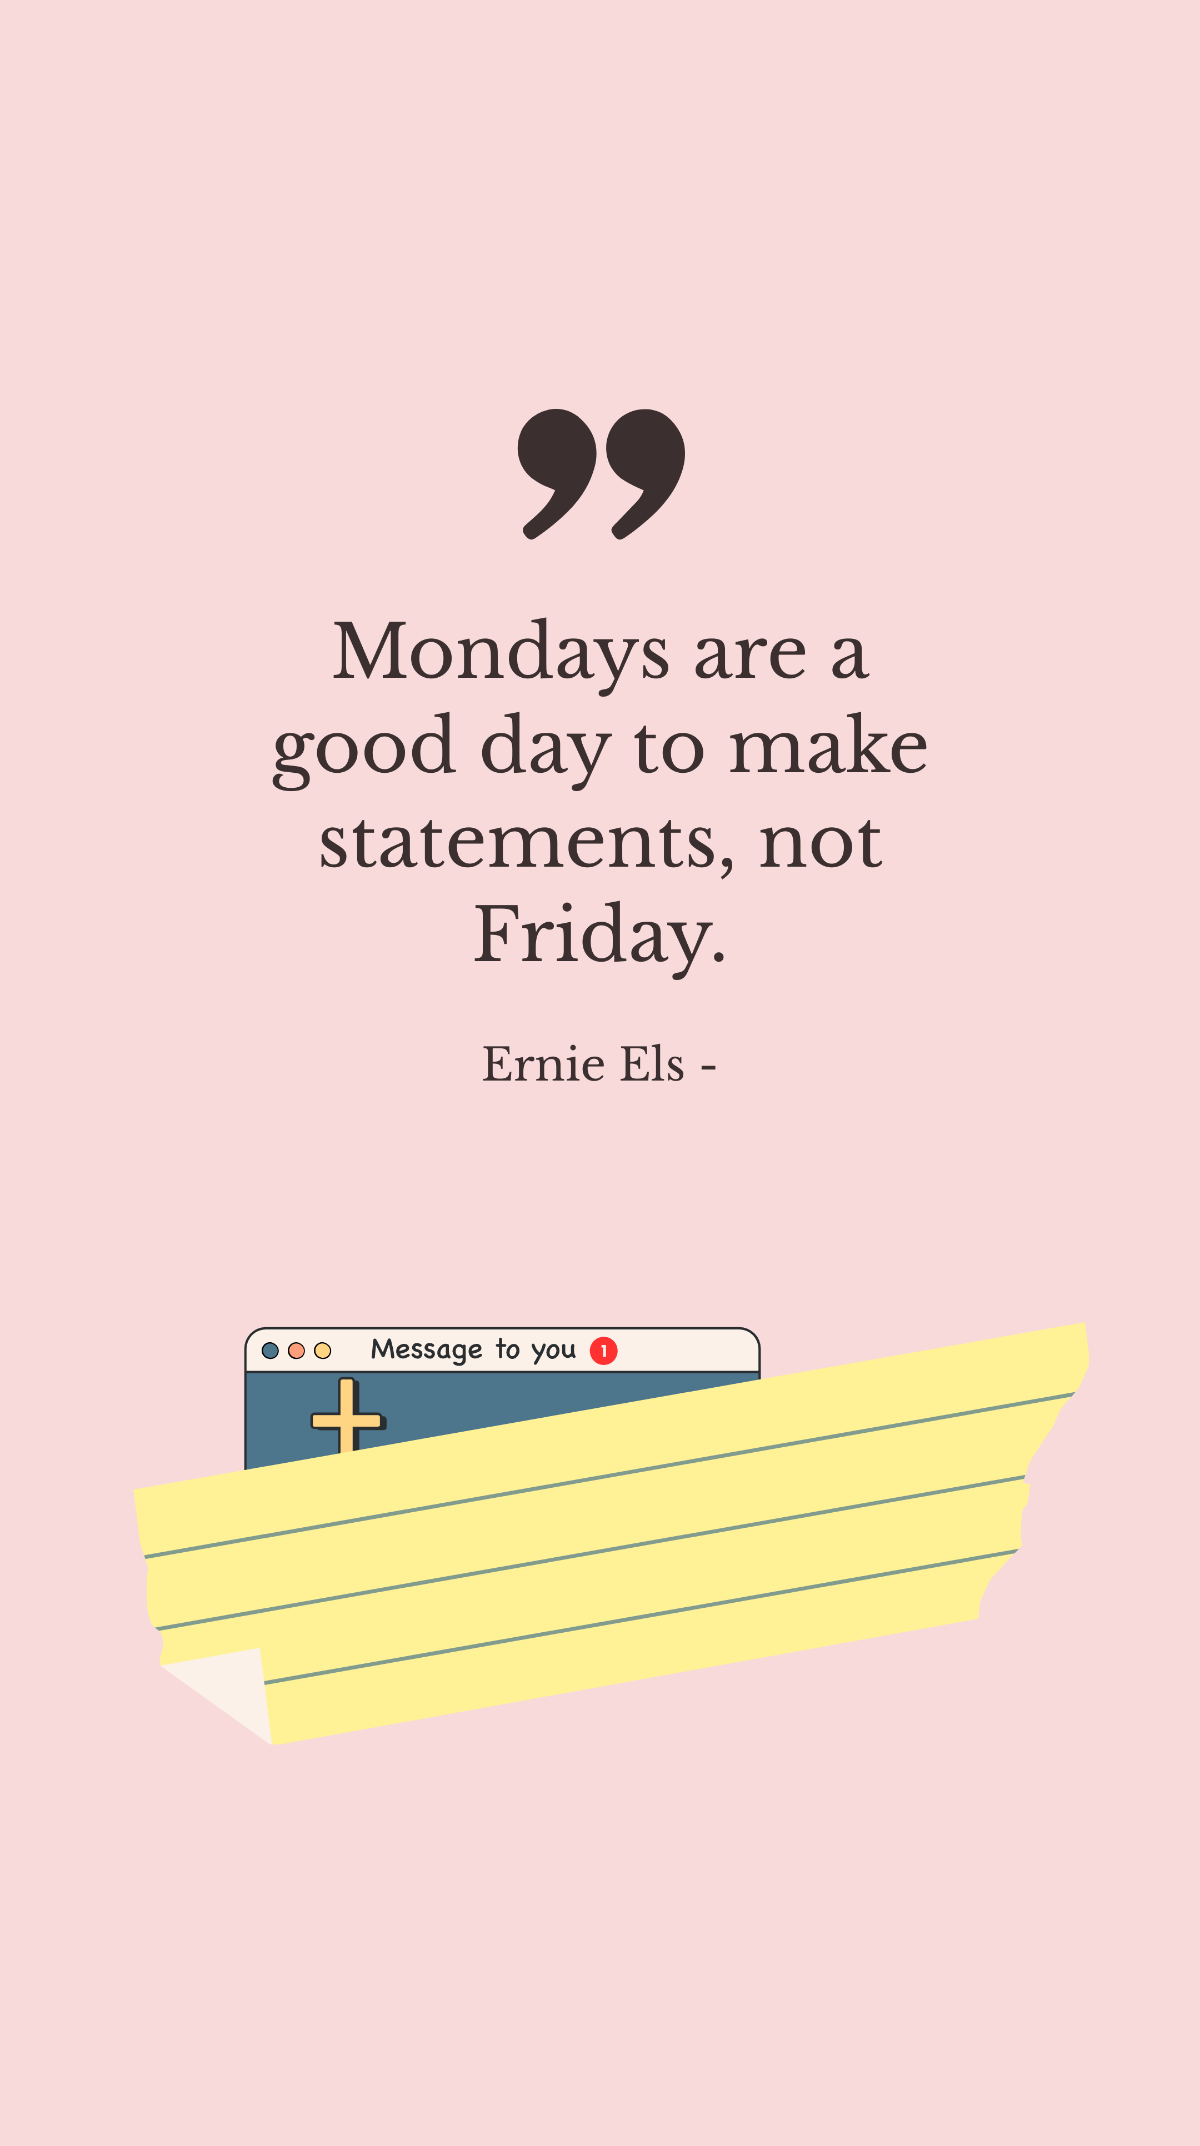 Ernie Els - Mondays are a good day to make statements, not Friday. Template